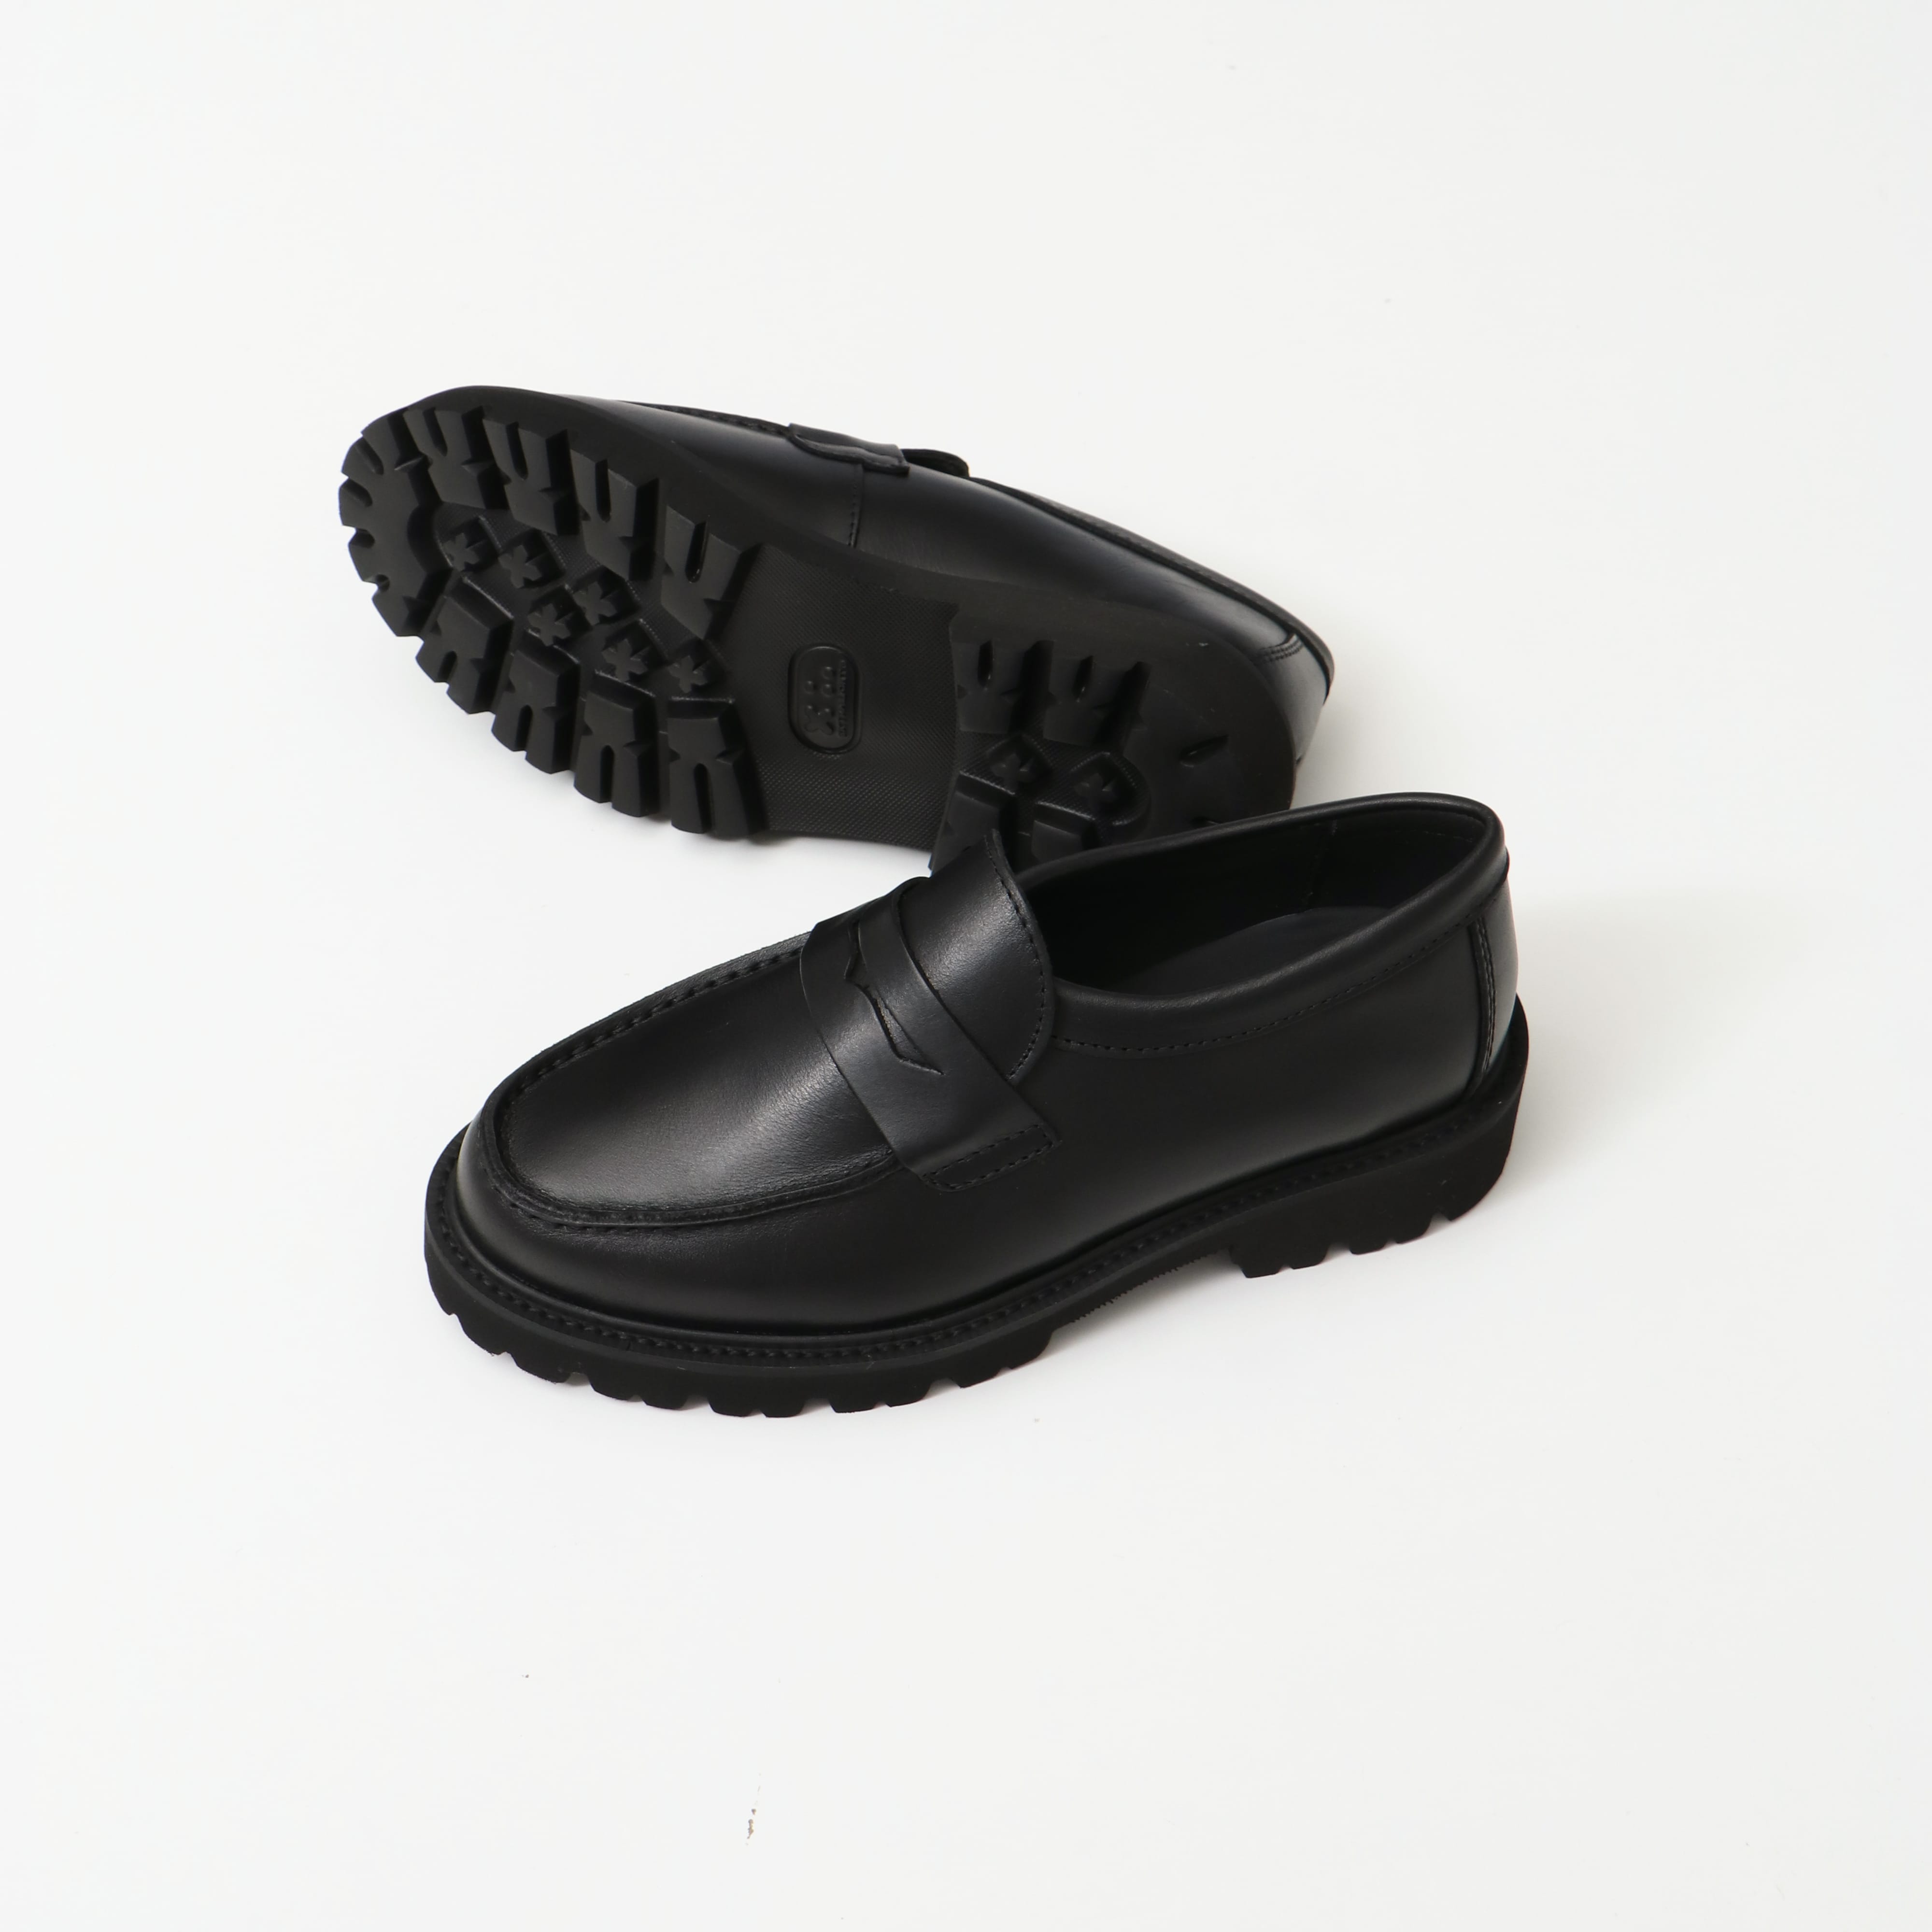 COIN LOAFERS